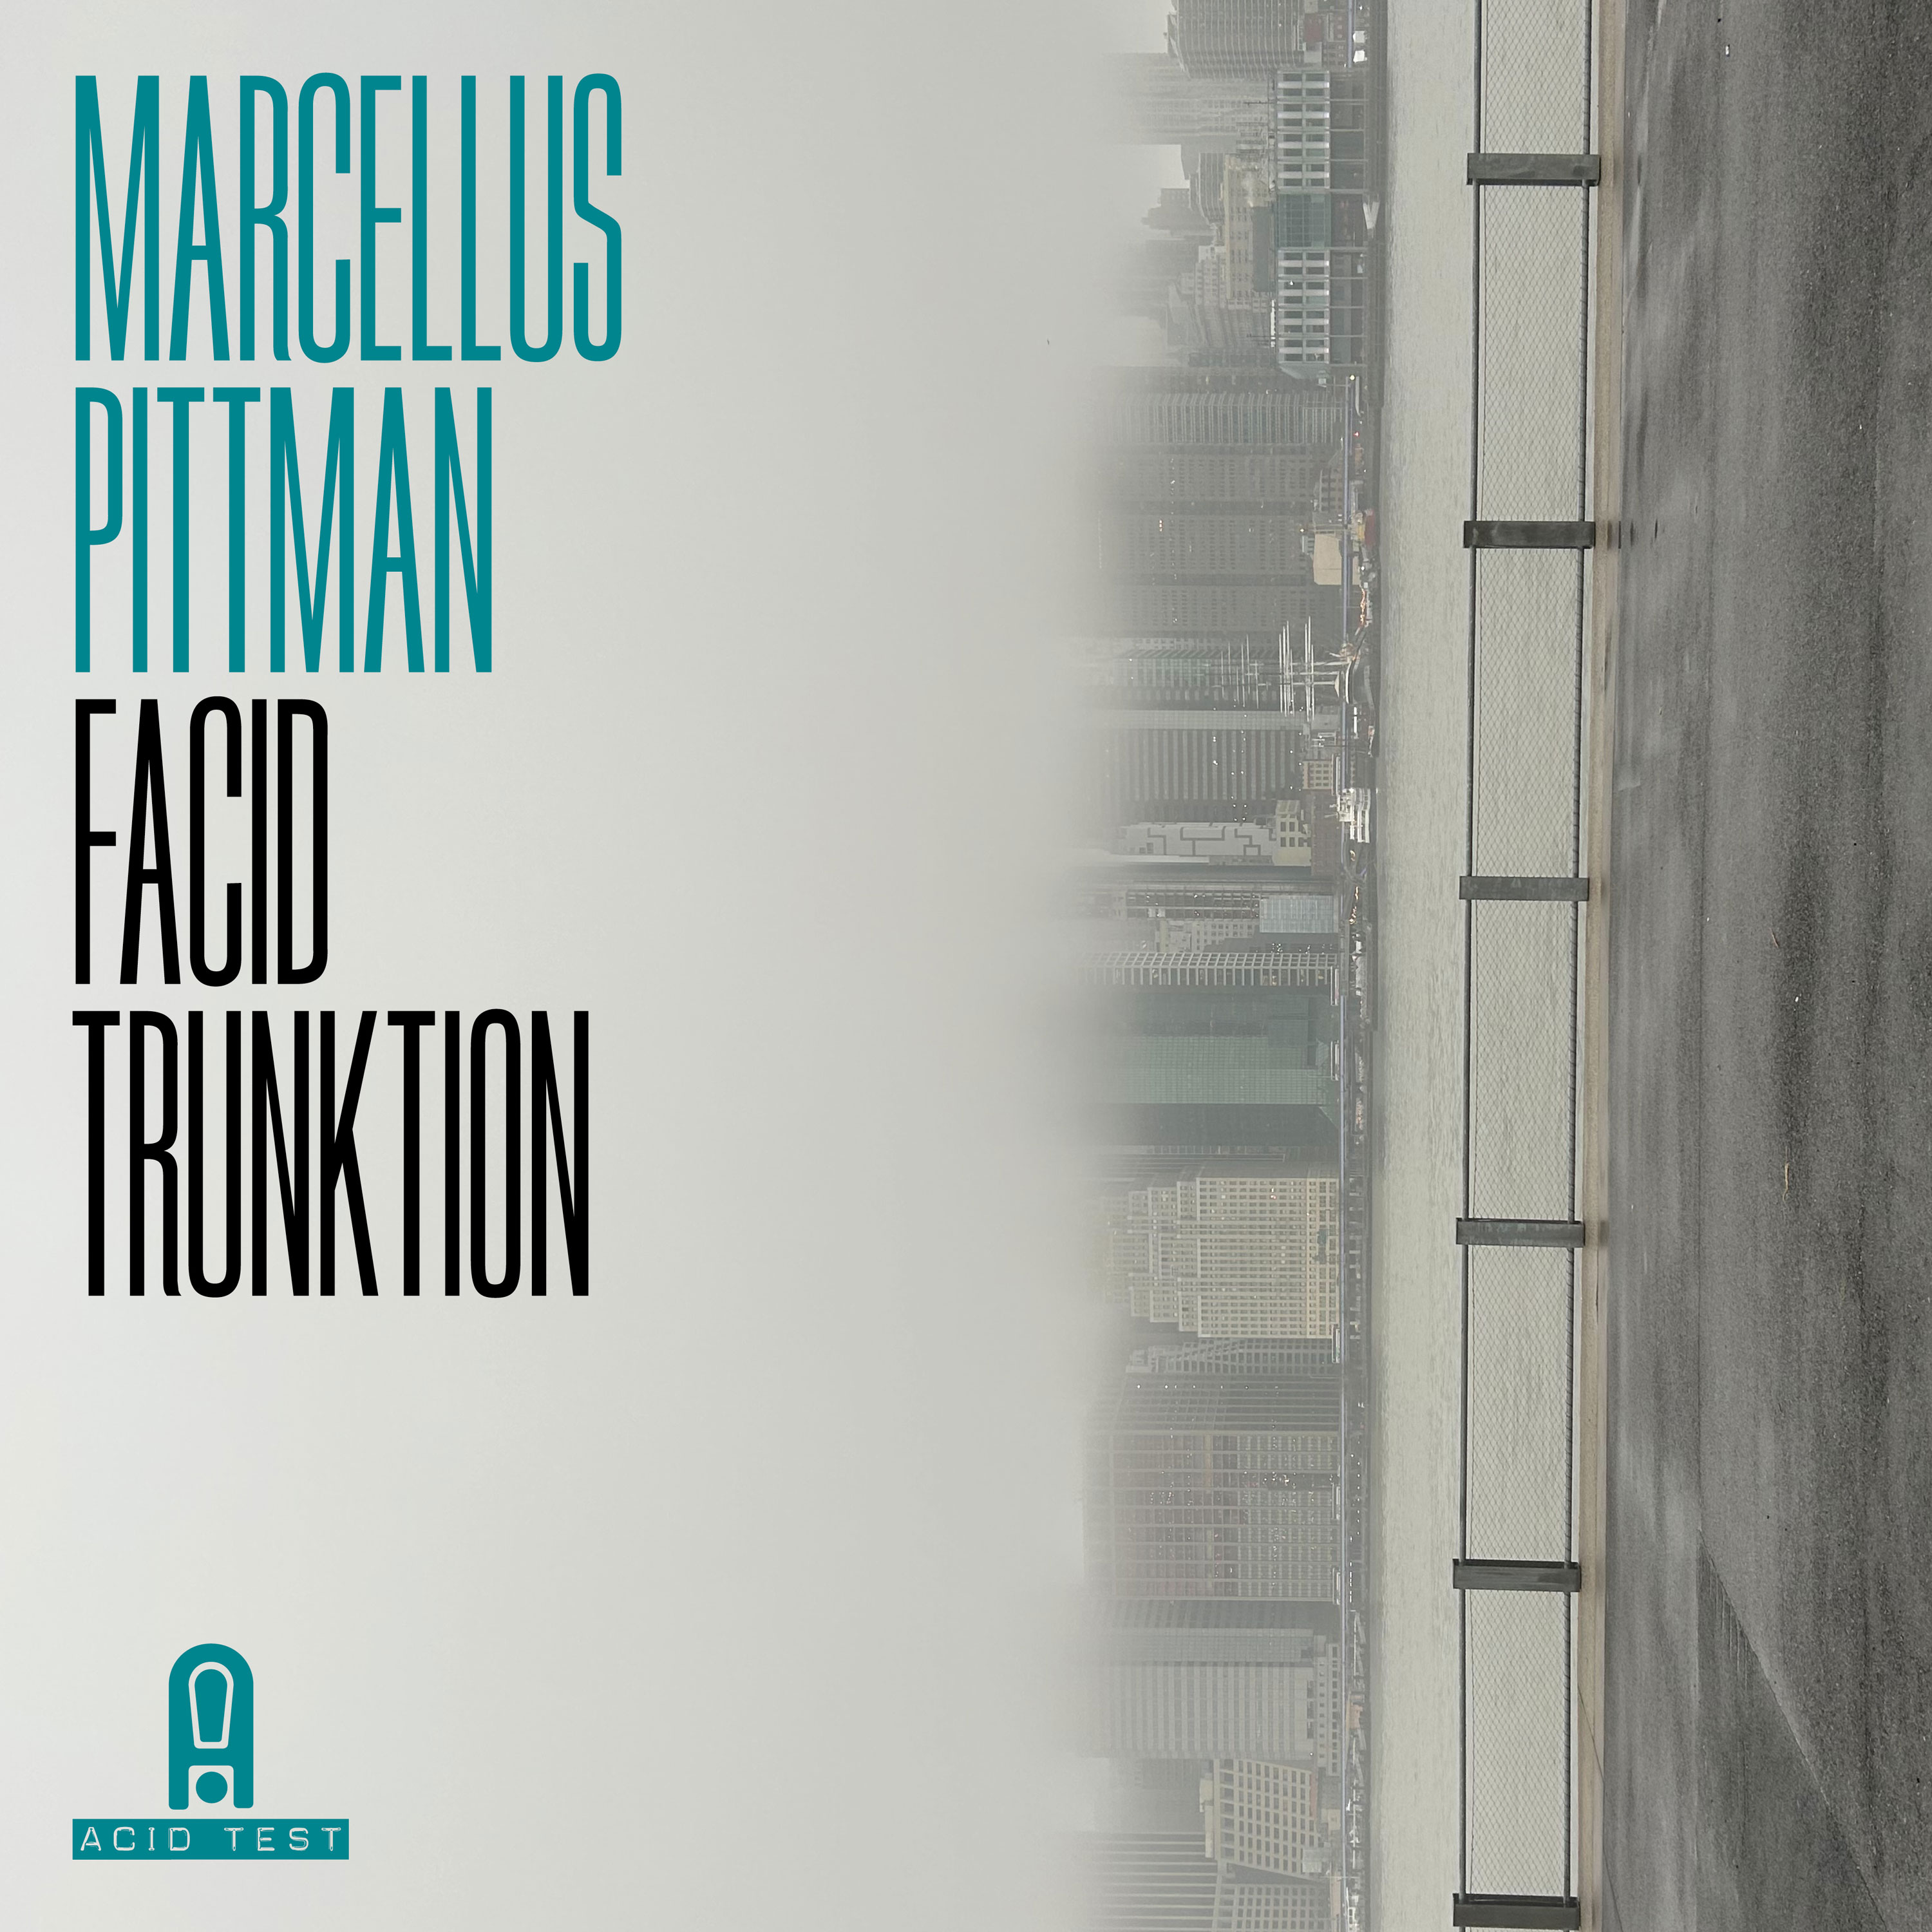 Marcellus Pittman - Facid Trunktion : 12inch